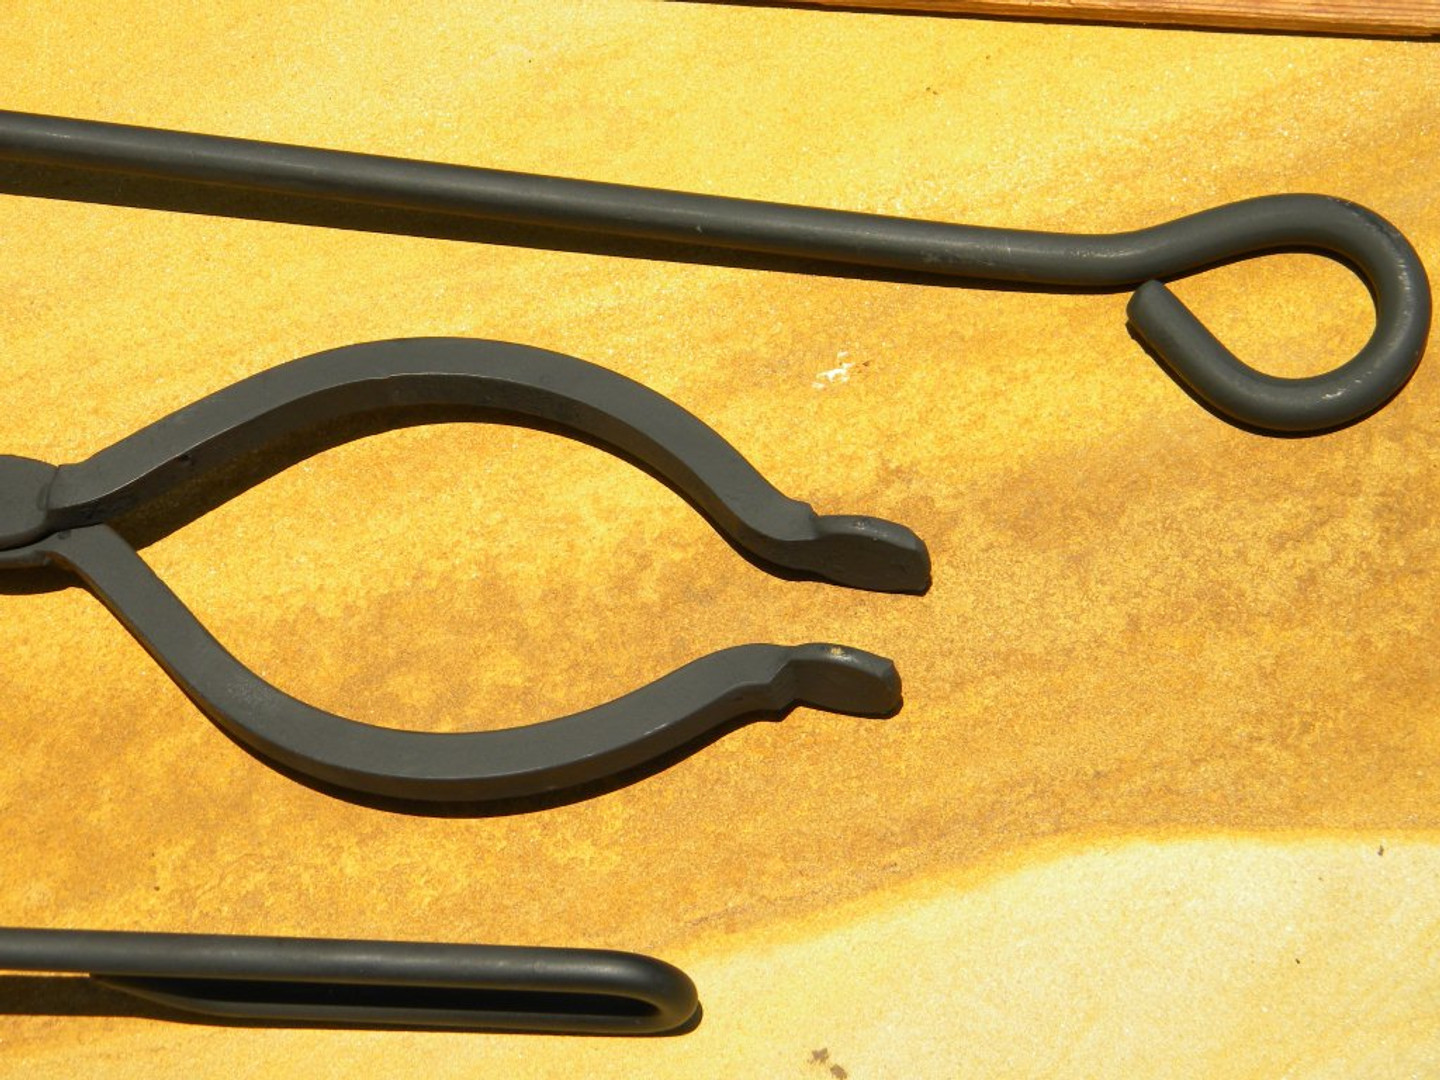 Fire Tools - This set consists of an Ash Shovel, Fire Poker and Log Tongs